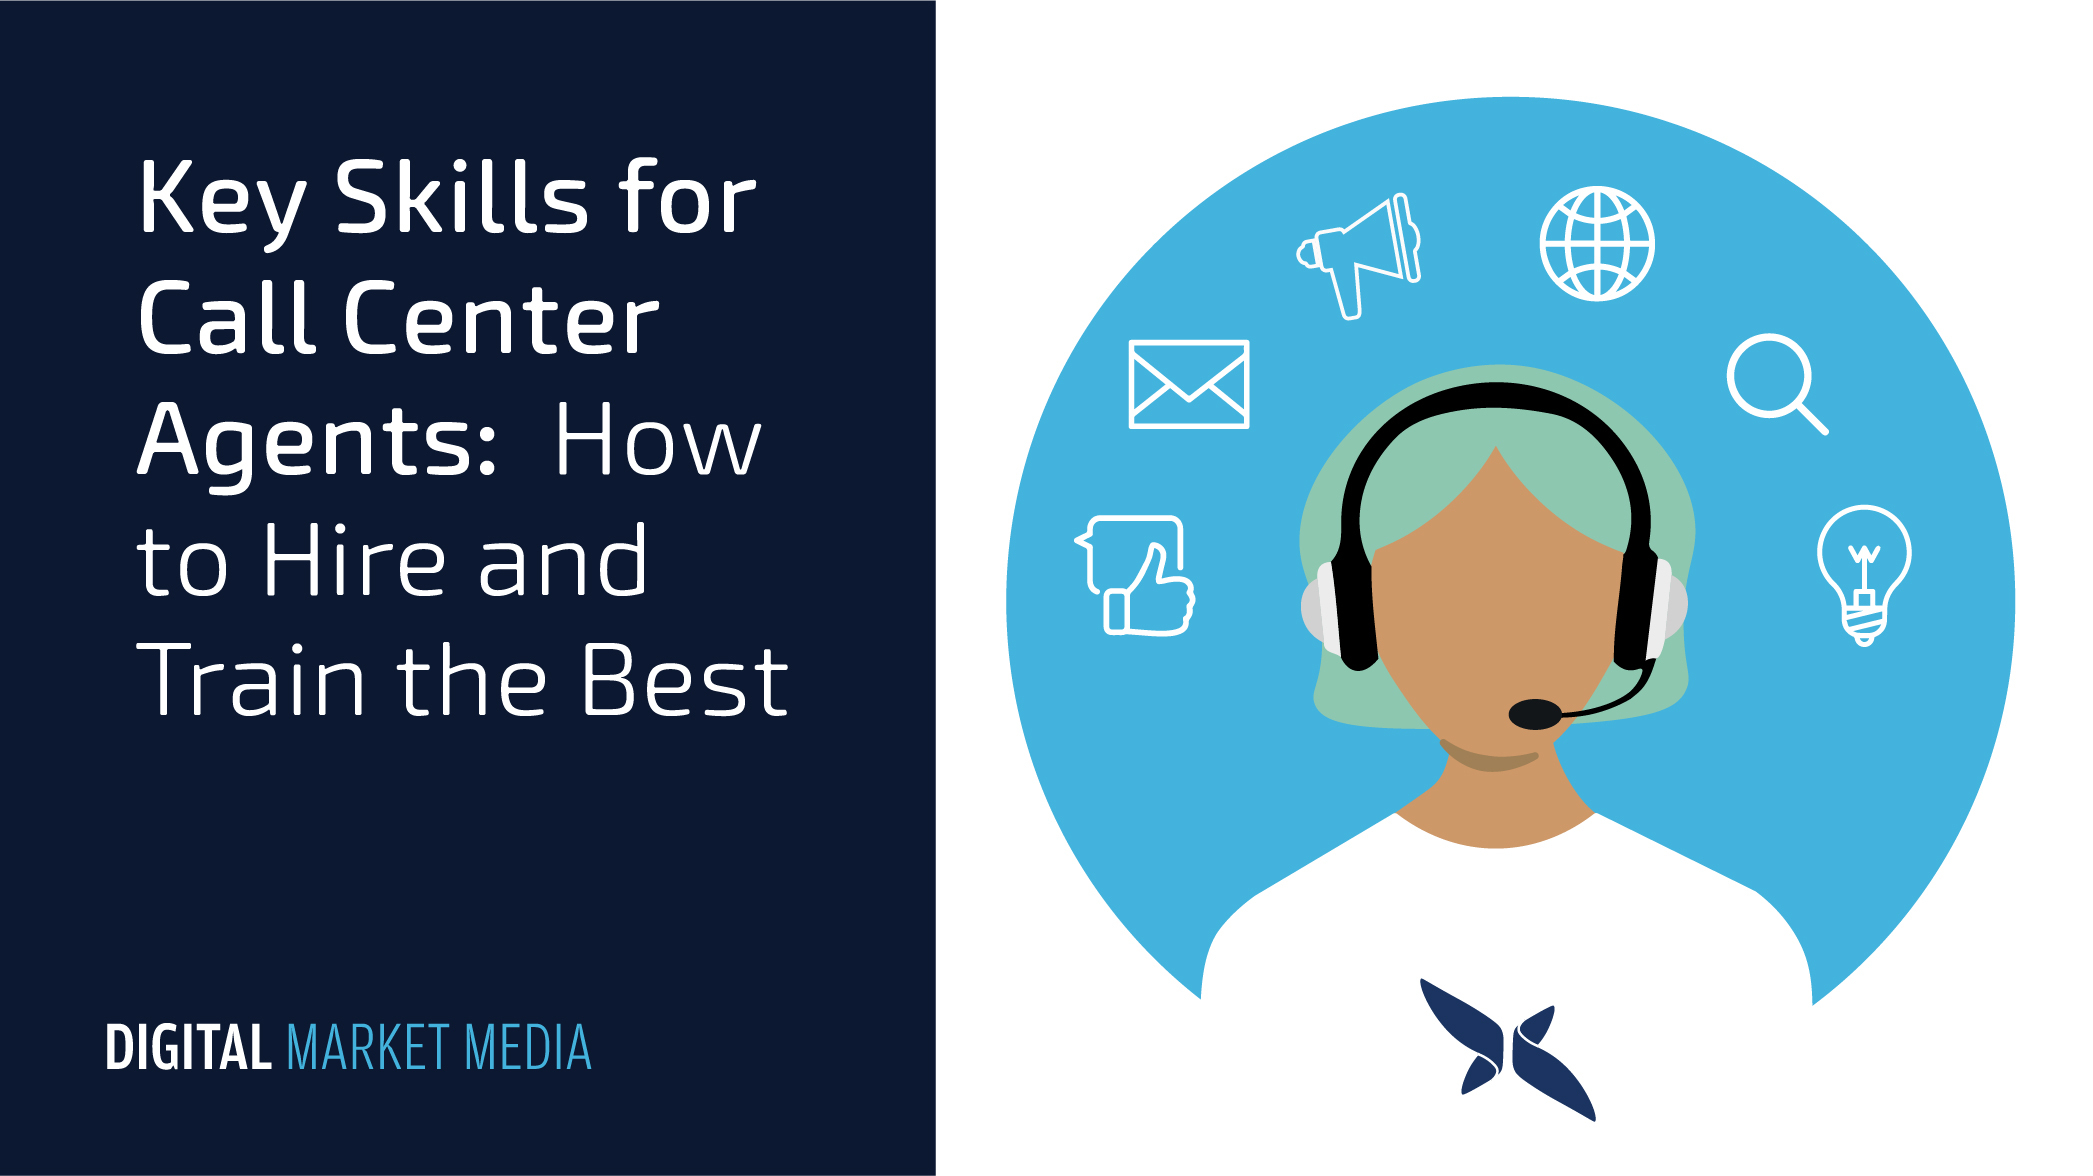 Key Skills for Call Center Agents: How to Hire and Train the Best